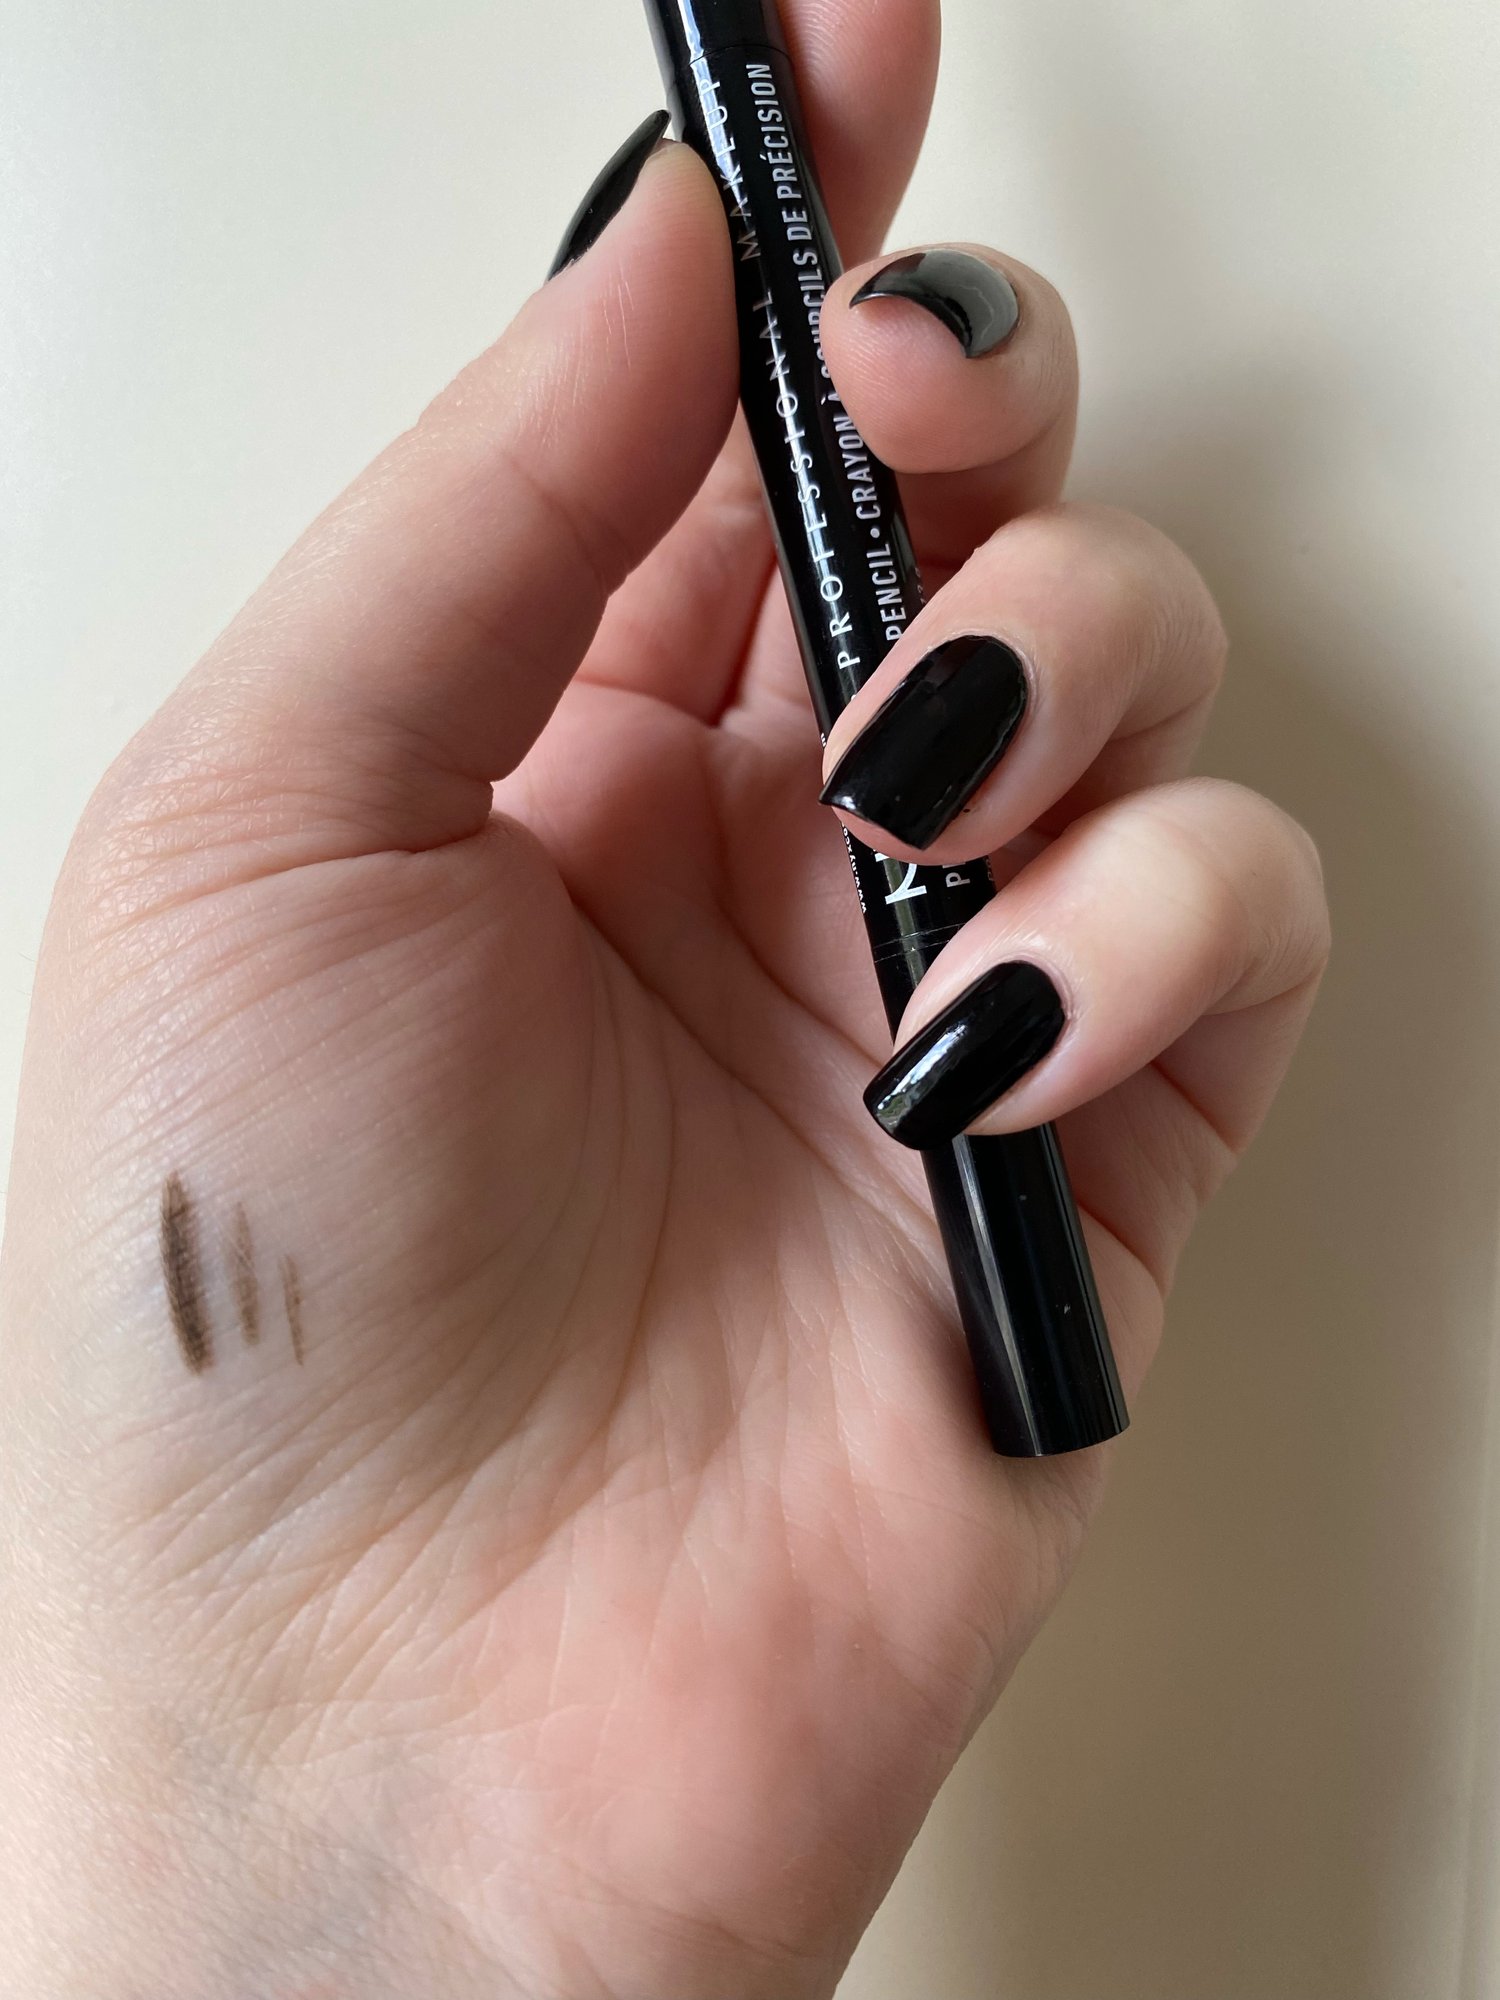 NYX Professional Makeup Precision Brow Pencil | Review + Swatches —  Gabriella Gallagher